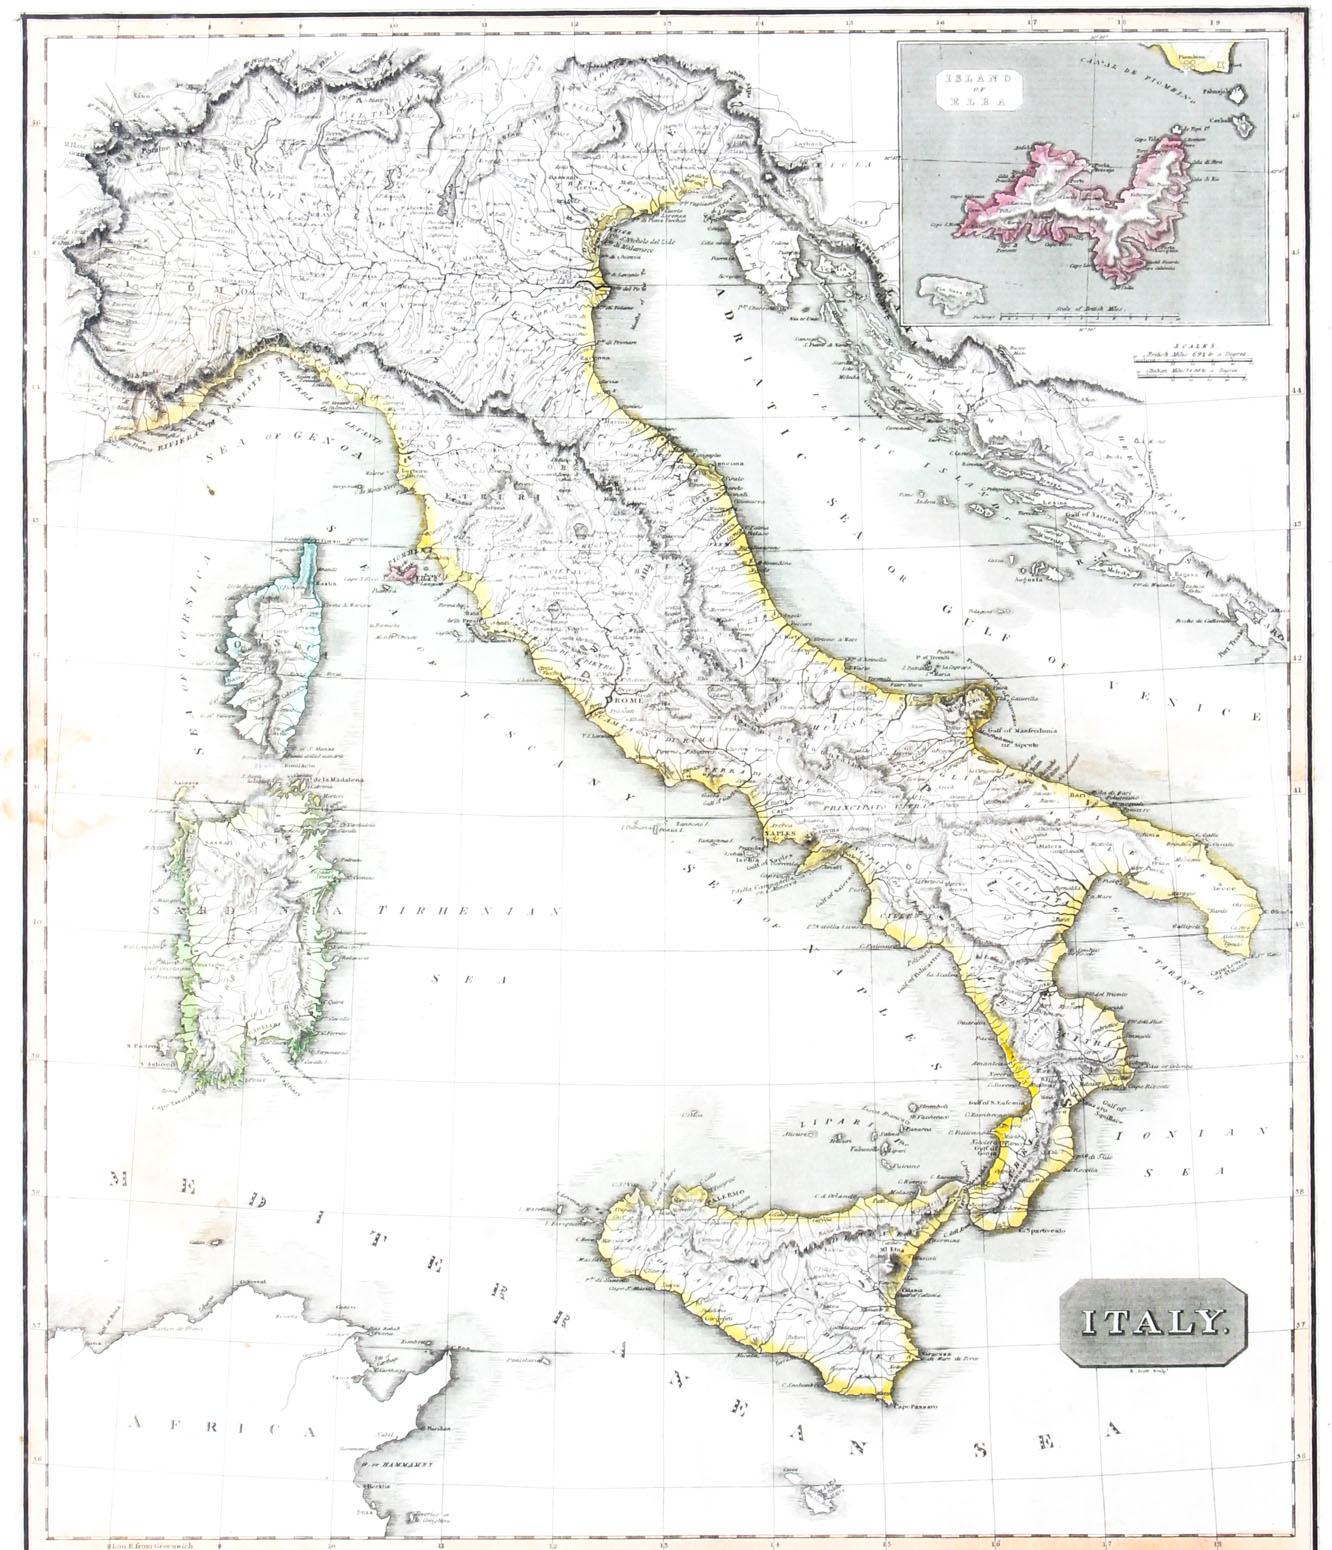 This is a magnificent museum quality antique hand-coloured map of Italy, dating from 1814.

This historic and very rare antique map was drawn and engraved by R. Scott for Thomsons, New General Atlas, Edinburgh. 

The map is very detailed and the